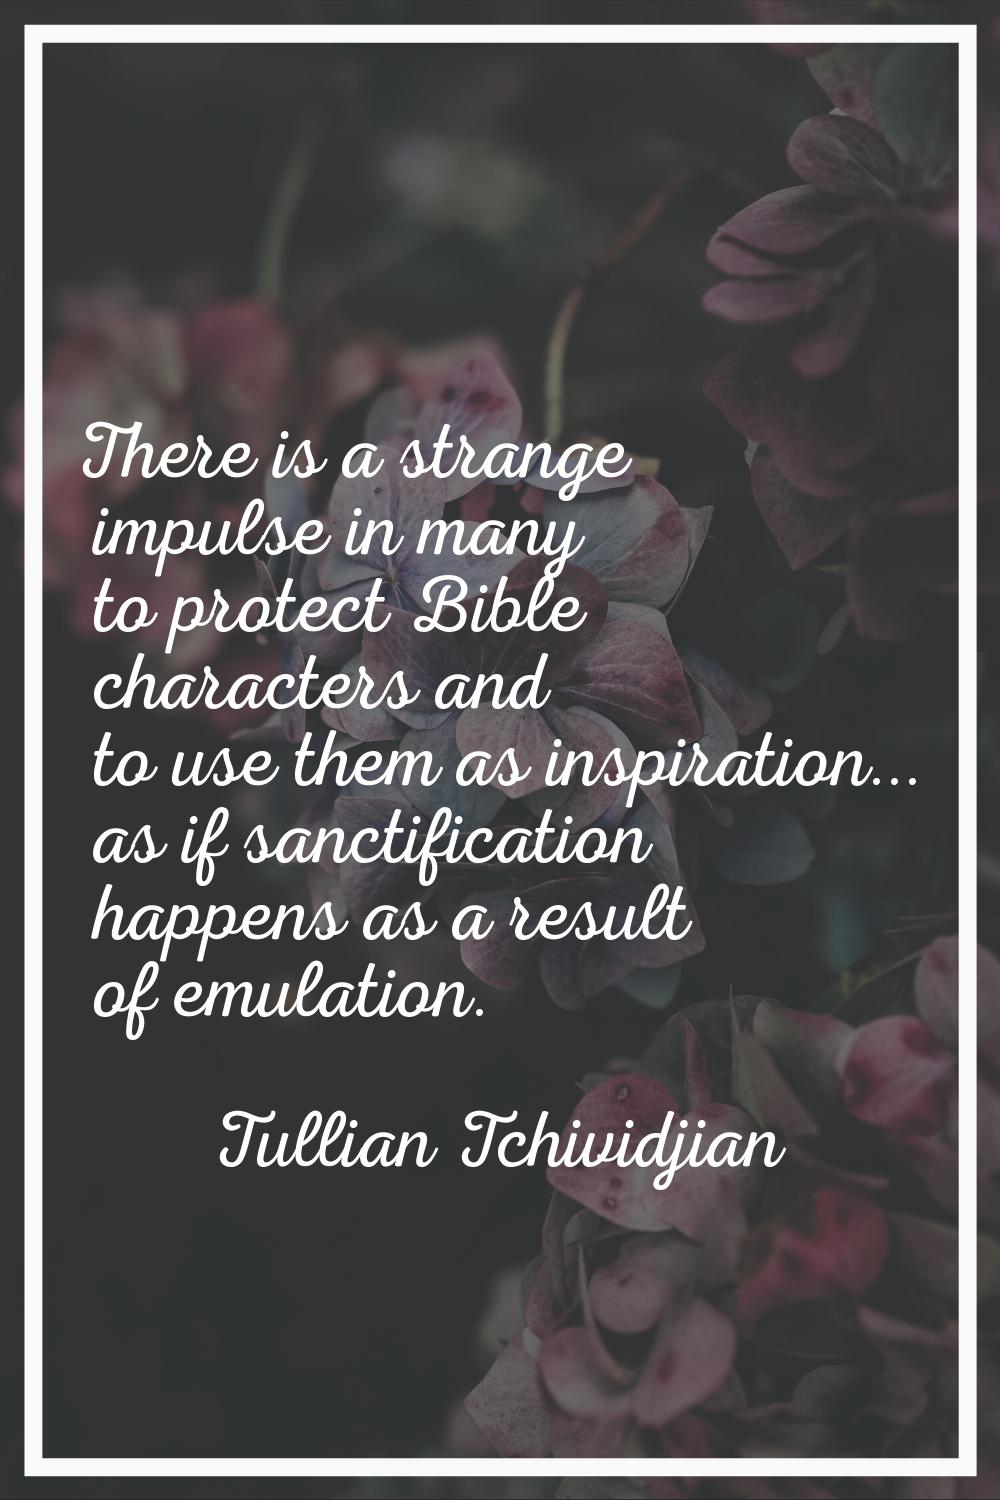 There is a strange impulse in many to protect Bible characters and to use them as inspiration... as